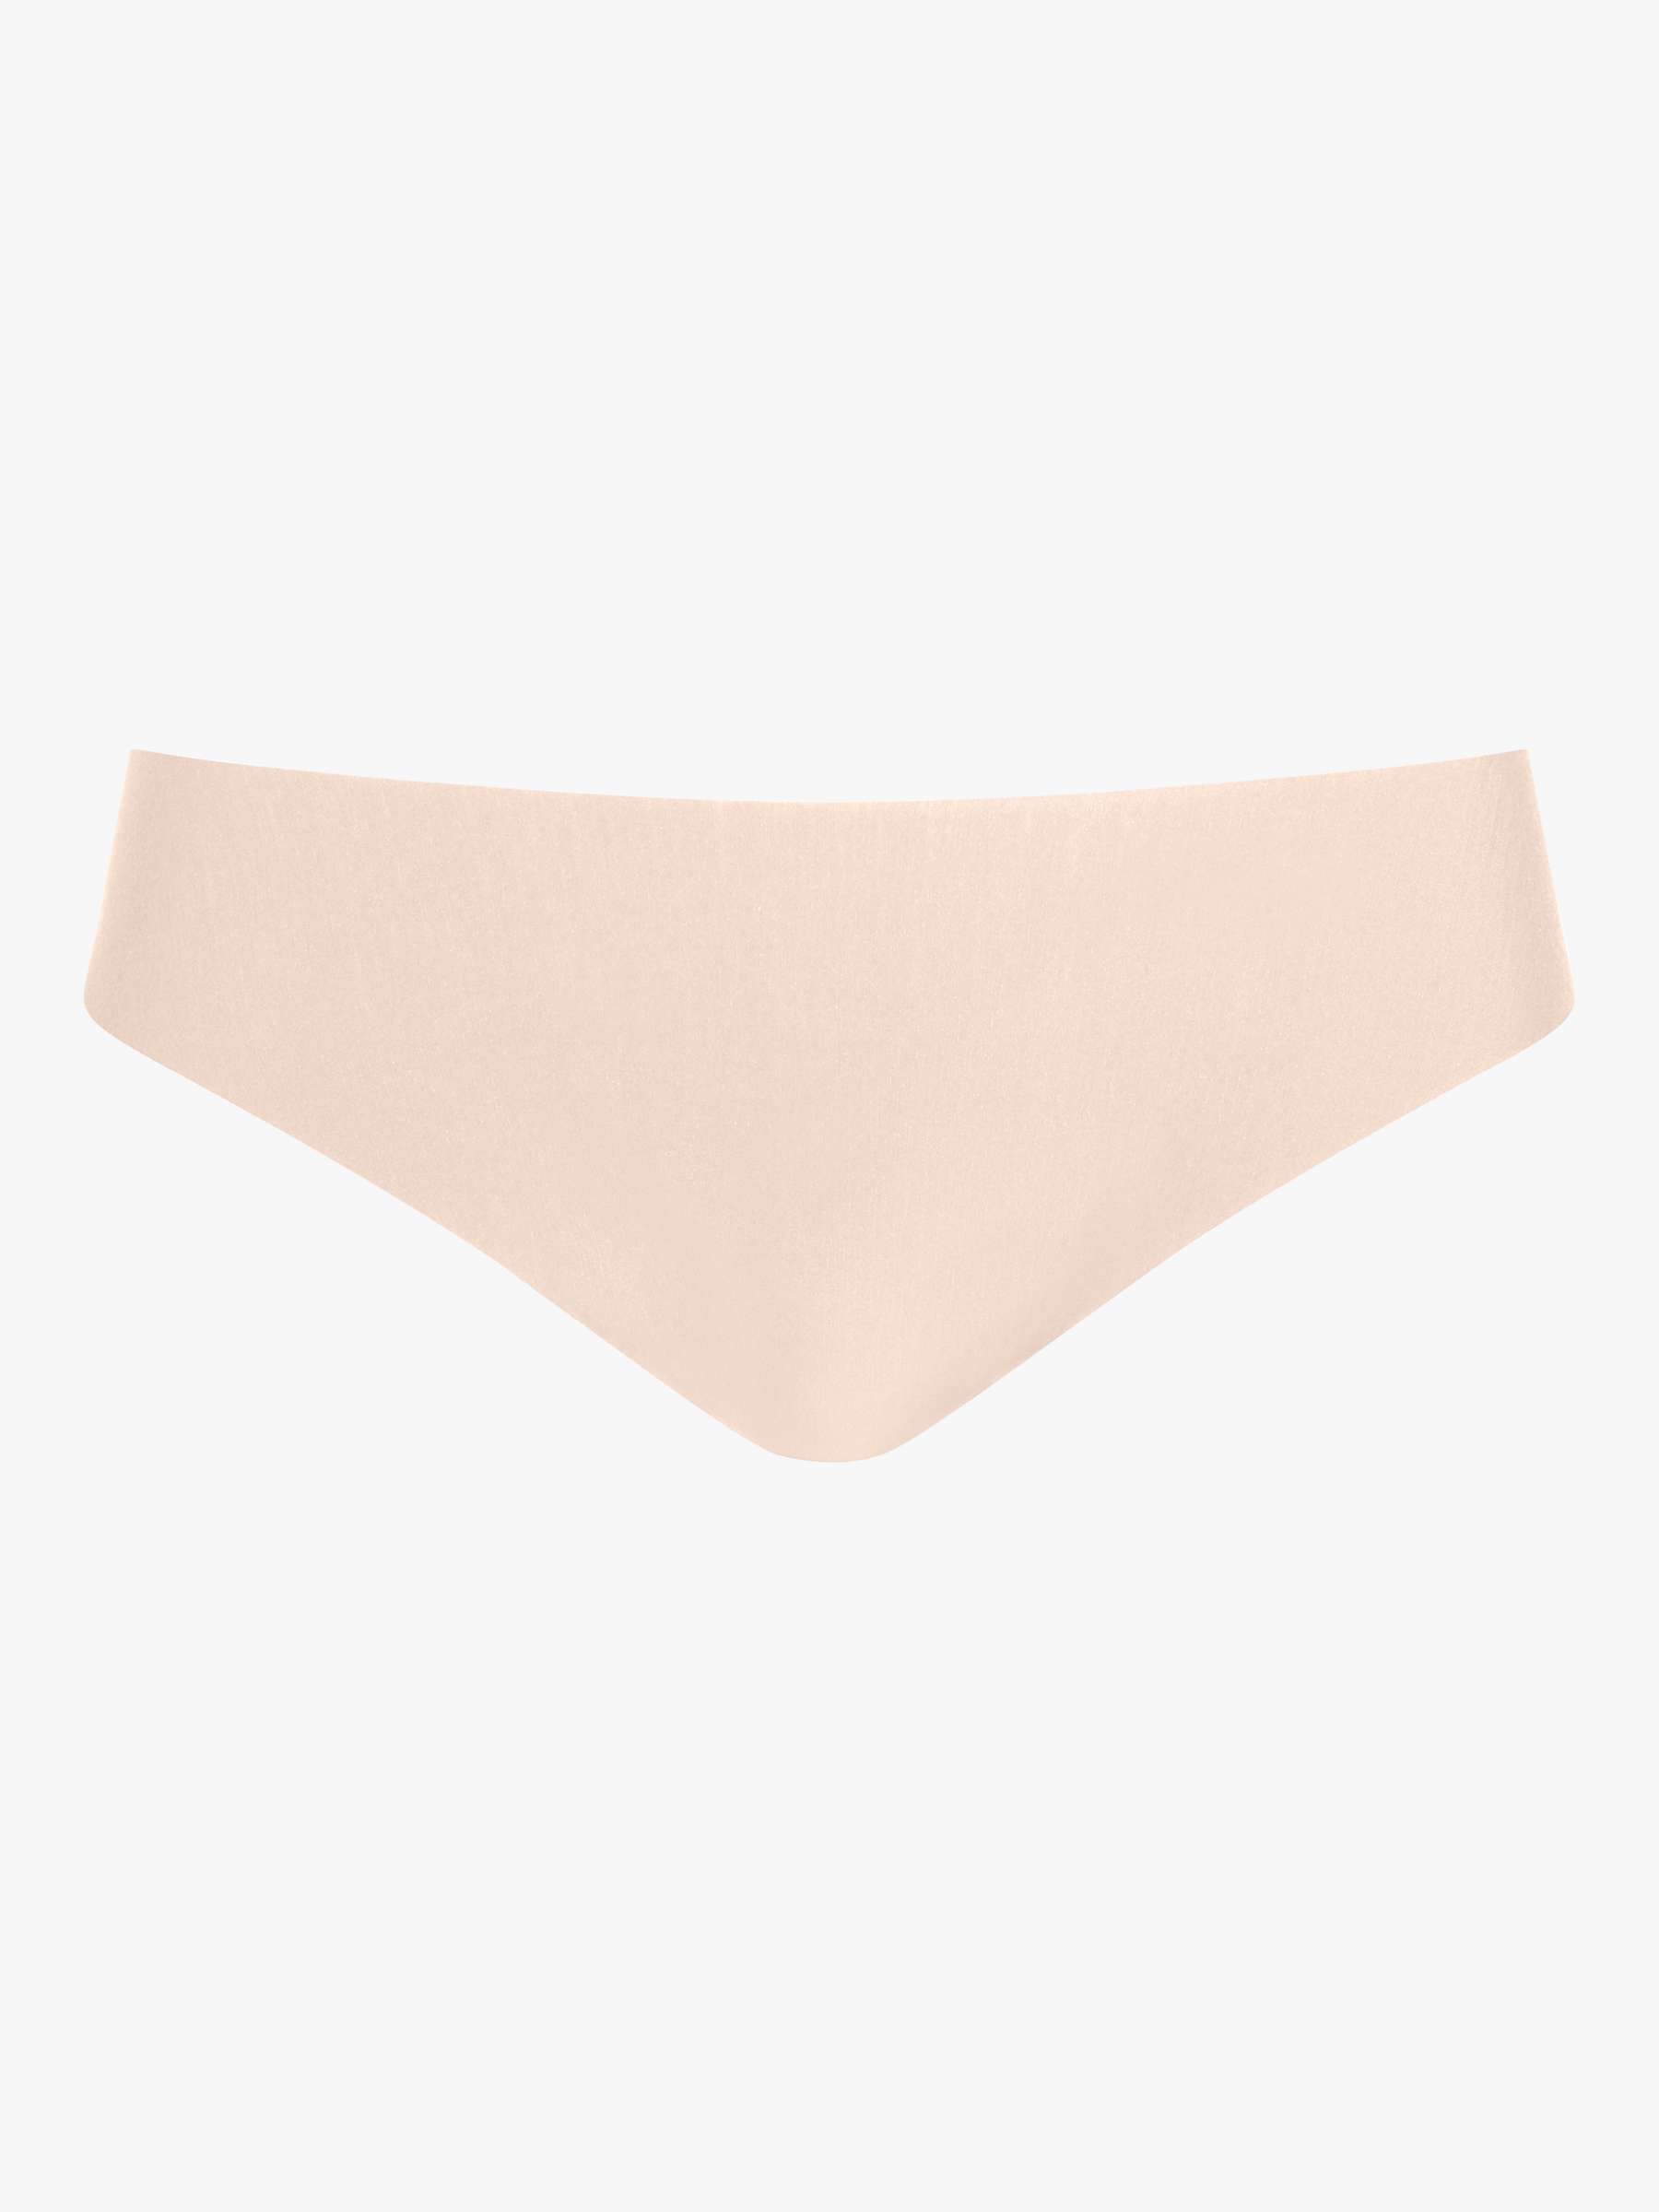 Buy Commando Butter Mid-Rise Seamless Thong Online at johnlewis.com